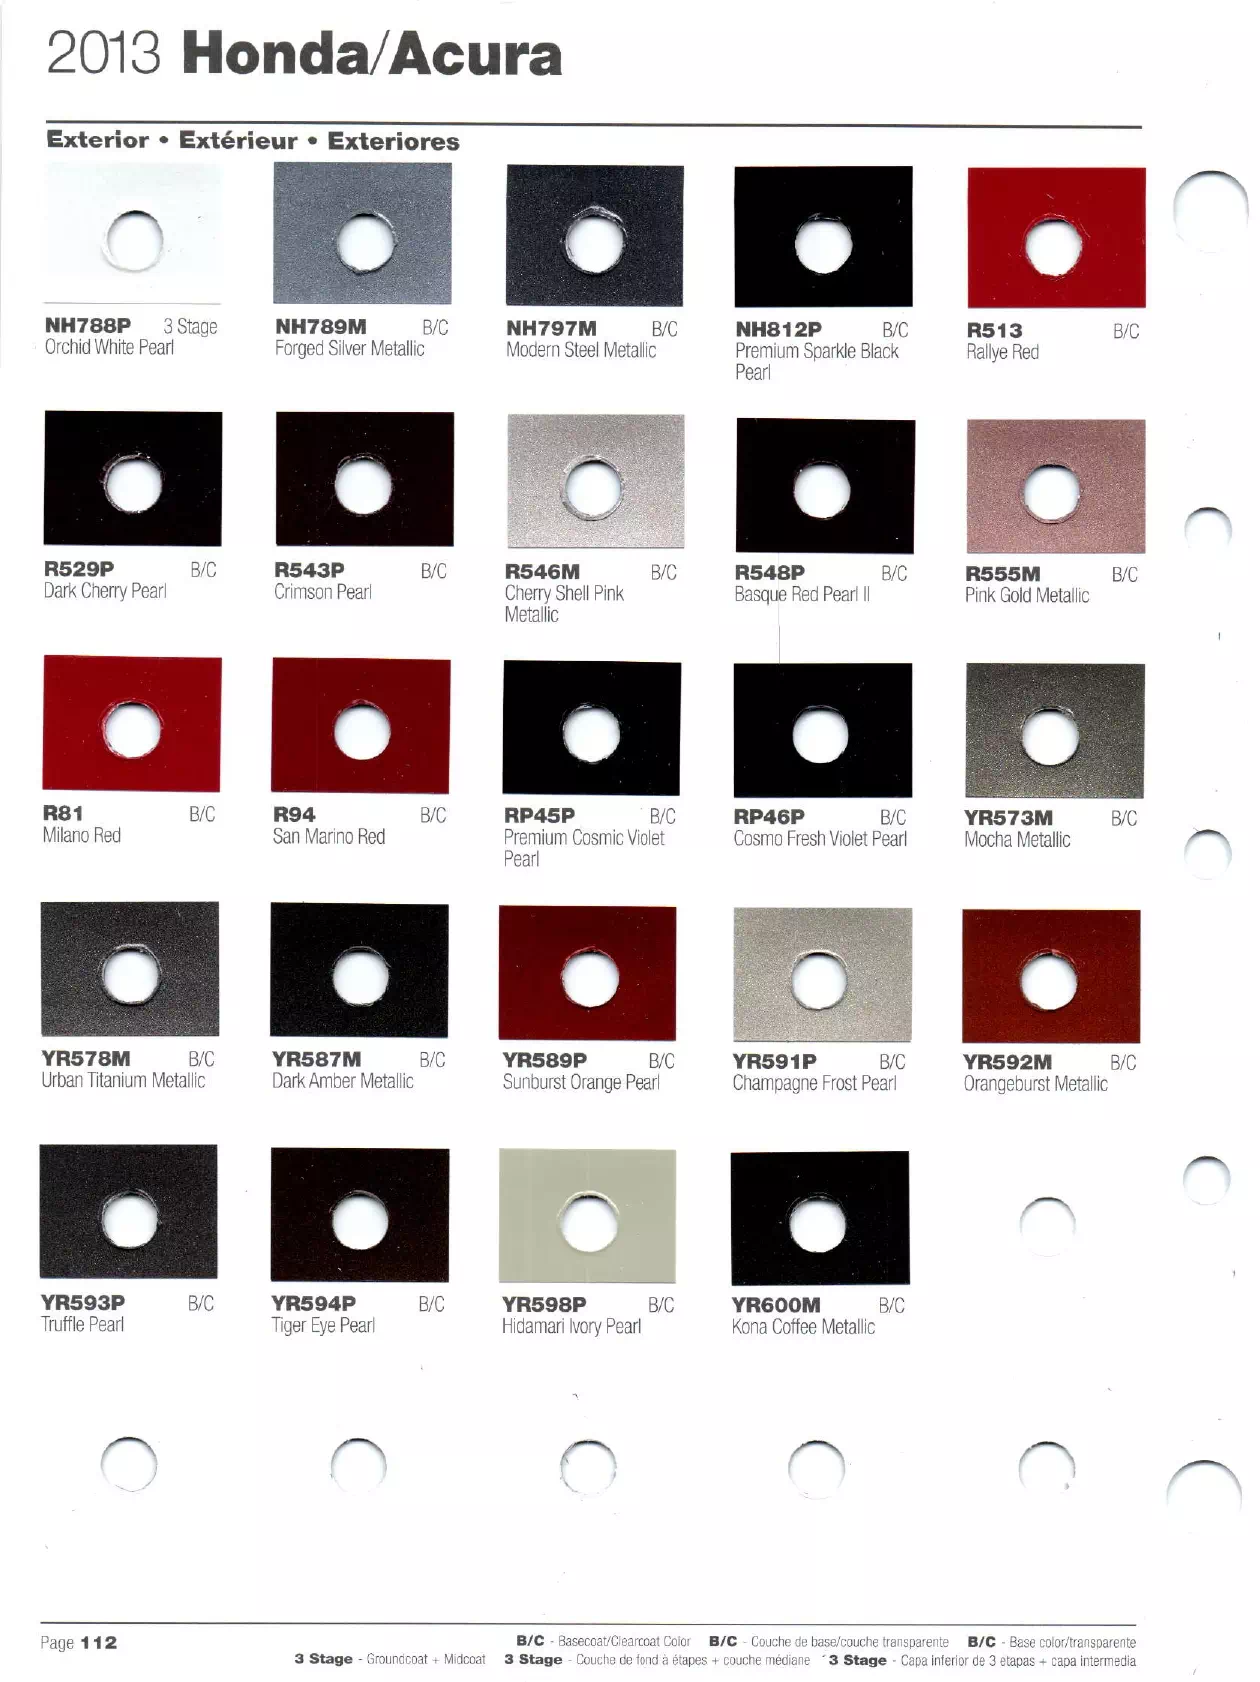 Honda and Acura exterior paint chip examples and their ordering codes for the 2013 vehicles